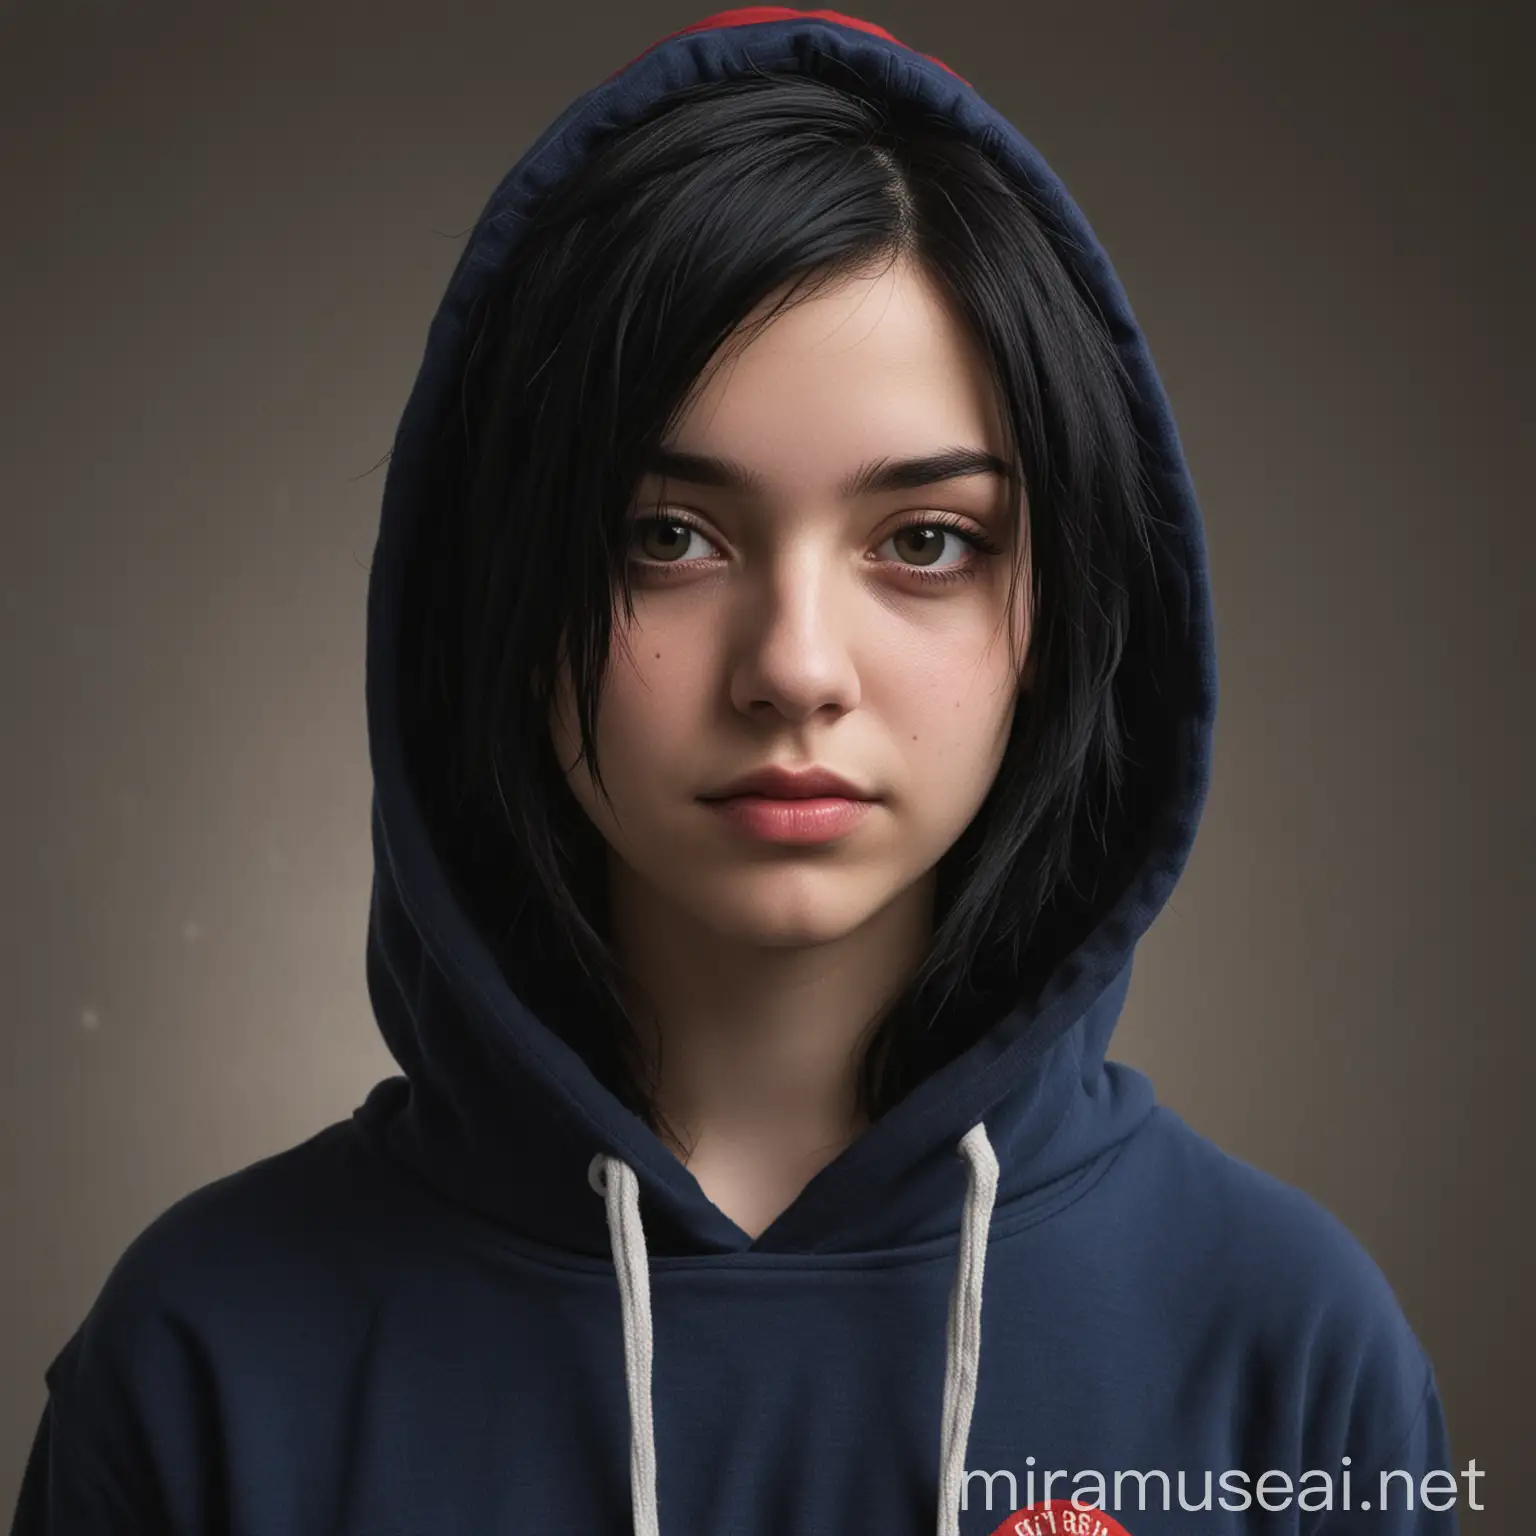 teenager, young, black hair, red patches, dark blue hoodie, hood down, low-key goth aesthetics